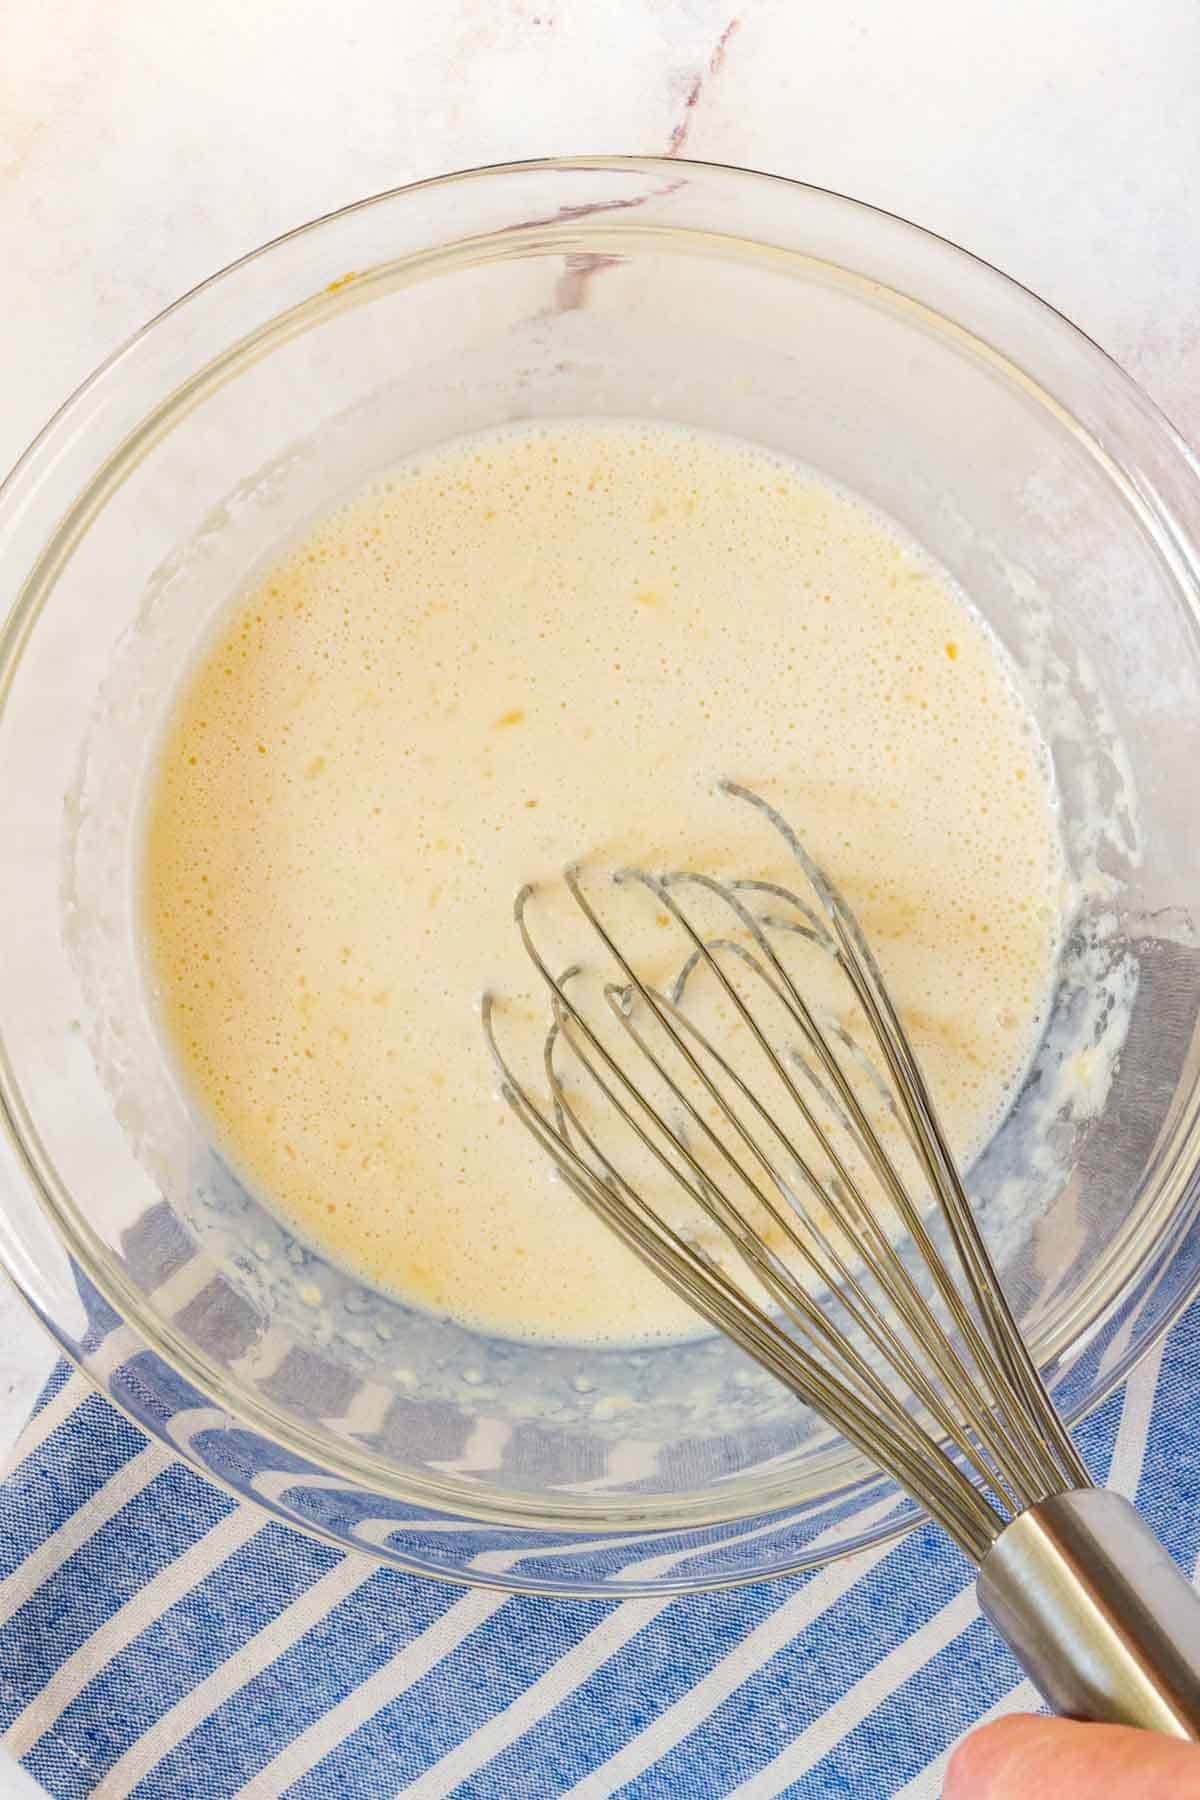 Wet pancake ingredients are whisked together in a glass mixing bowl.